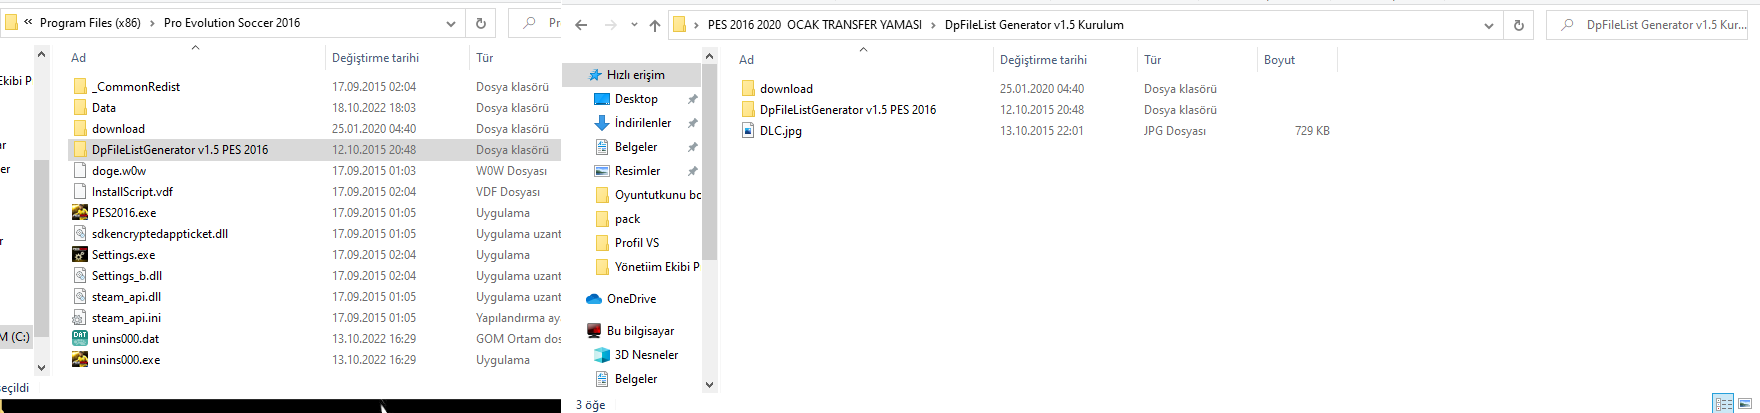 PES 2017 DPFILELIST GENERATOR V1.8 - PES 2017 Gaming WitH TR in 2023